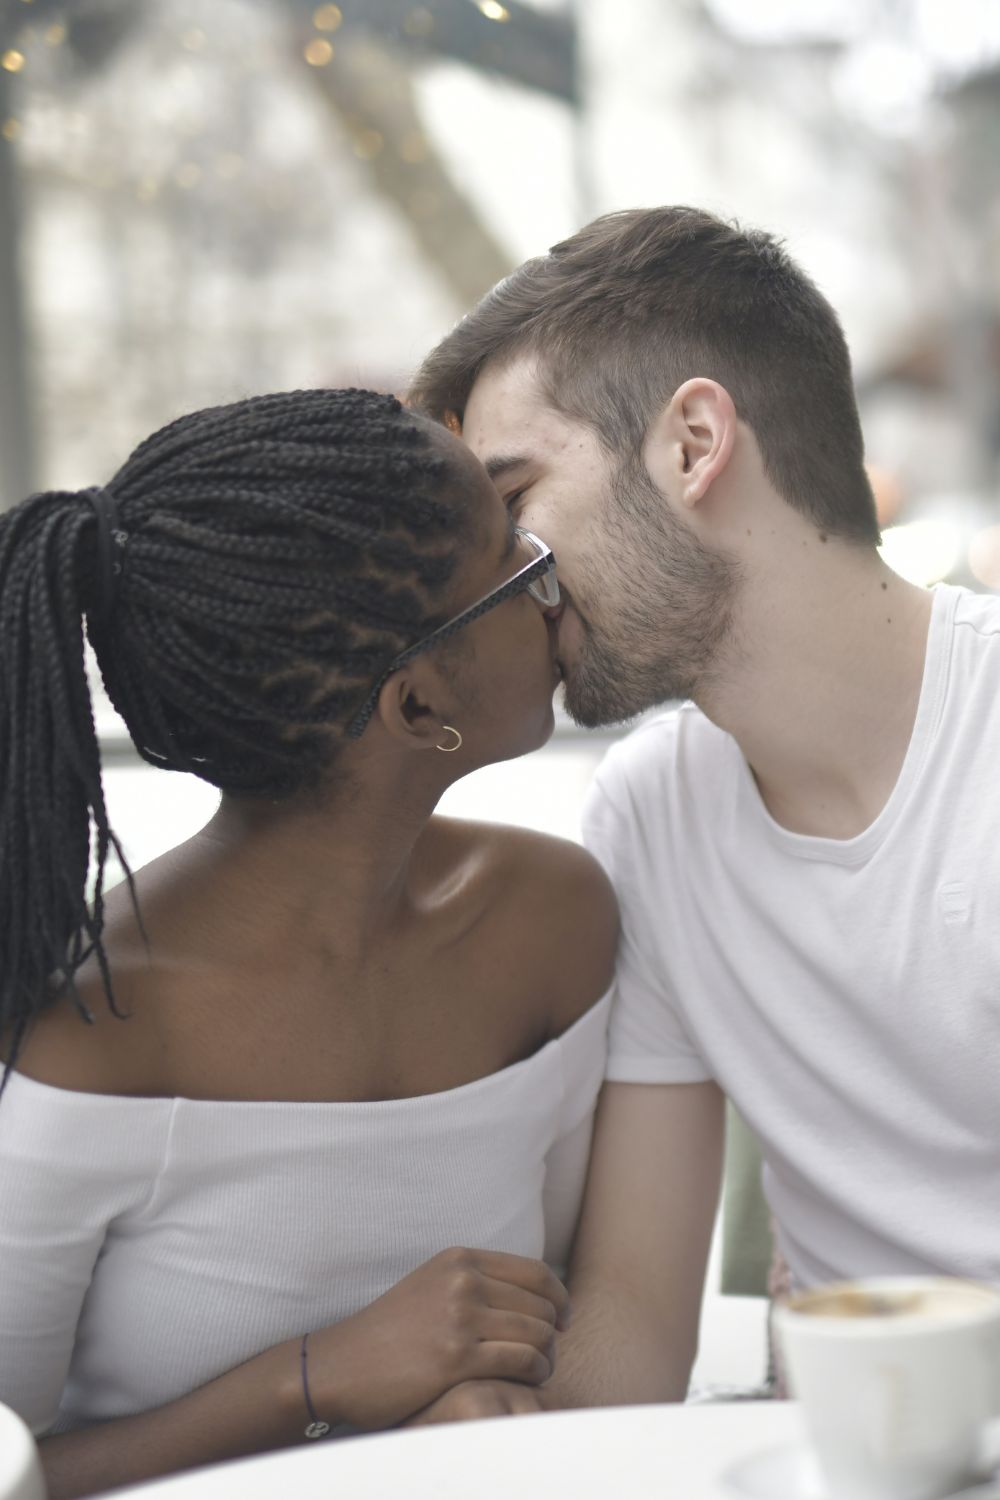 What happens when married couples stop kissing